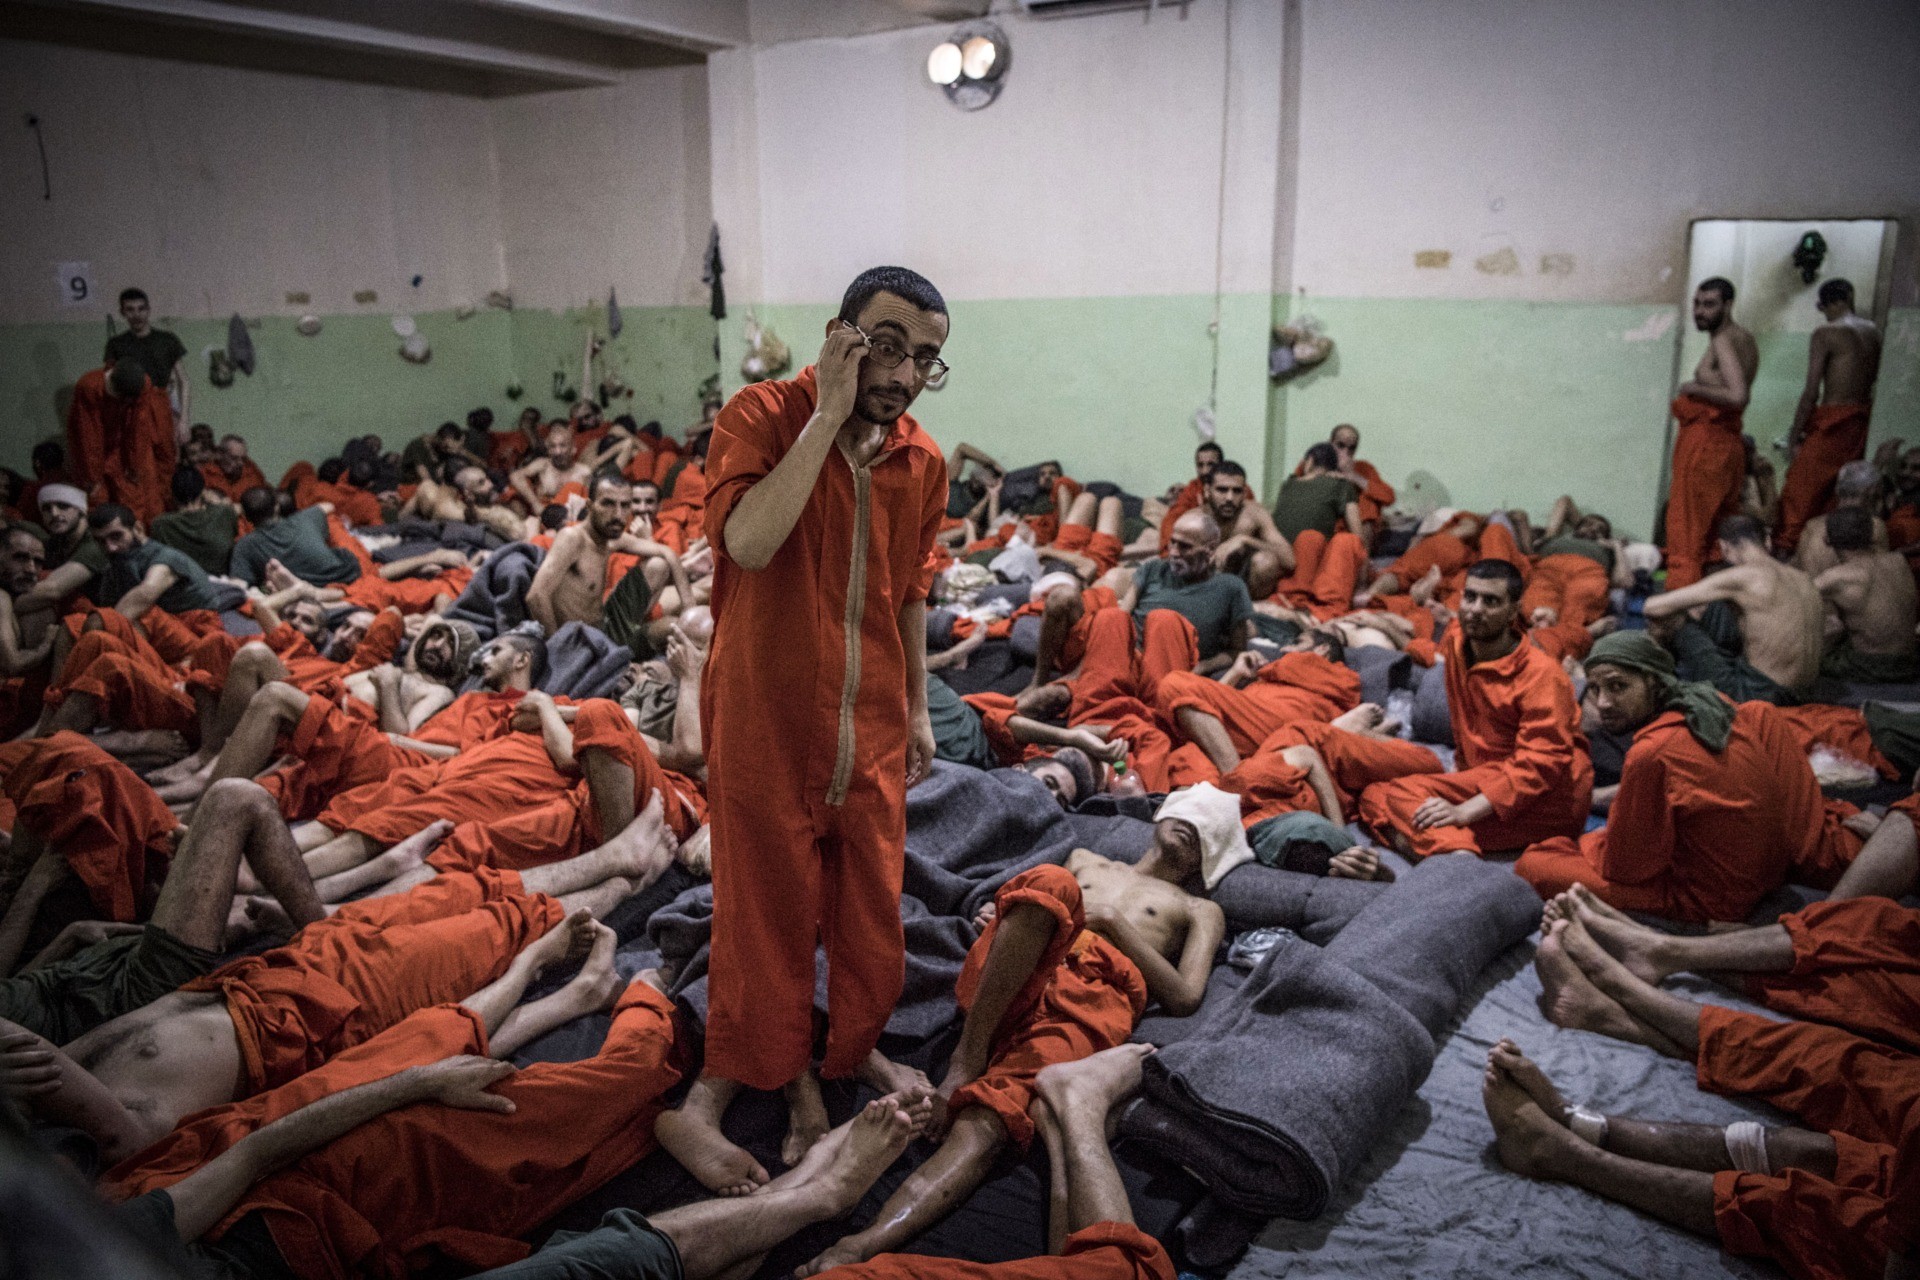 TOPSHOT - Men, suspected of being affiliated with the Islamic State (IS) group, gather in a prison cell in the northeastern Syrian city of Hasakeh on October 26, 2019. - Kurdish sources say around 12,000 IS fighters including Syrians, Iraqis as well as foreigners from 54 countries are being held in Kurdish-run prisons in northern Syria. (Photo by FADEL SENNA / AFP) (Photo by FADEL SENNA/AFP via Getty Images)